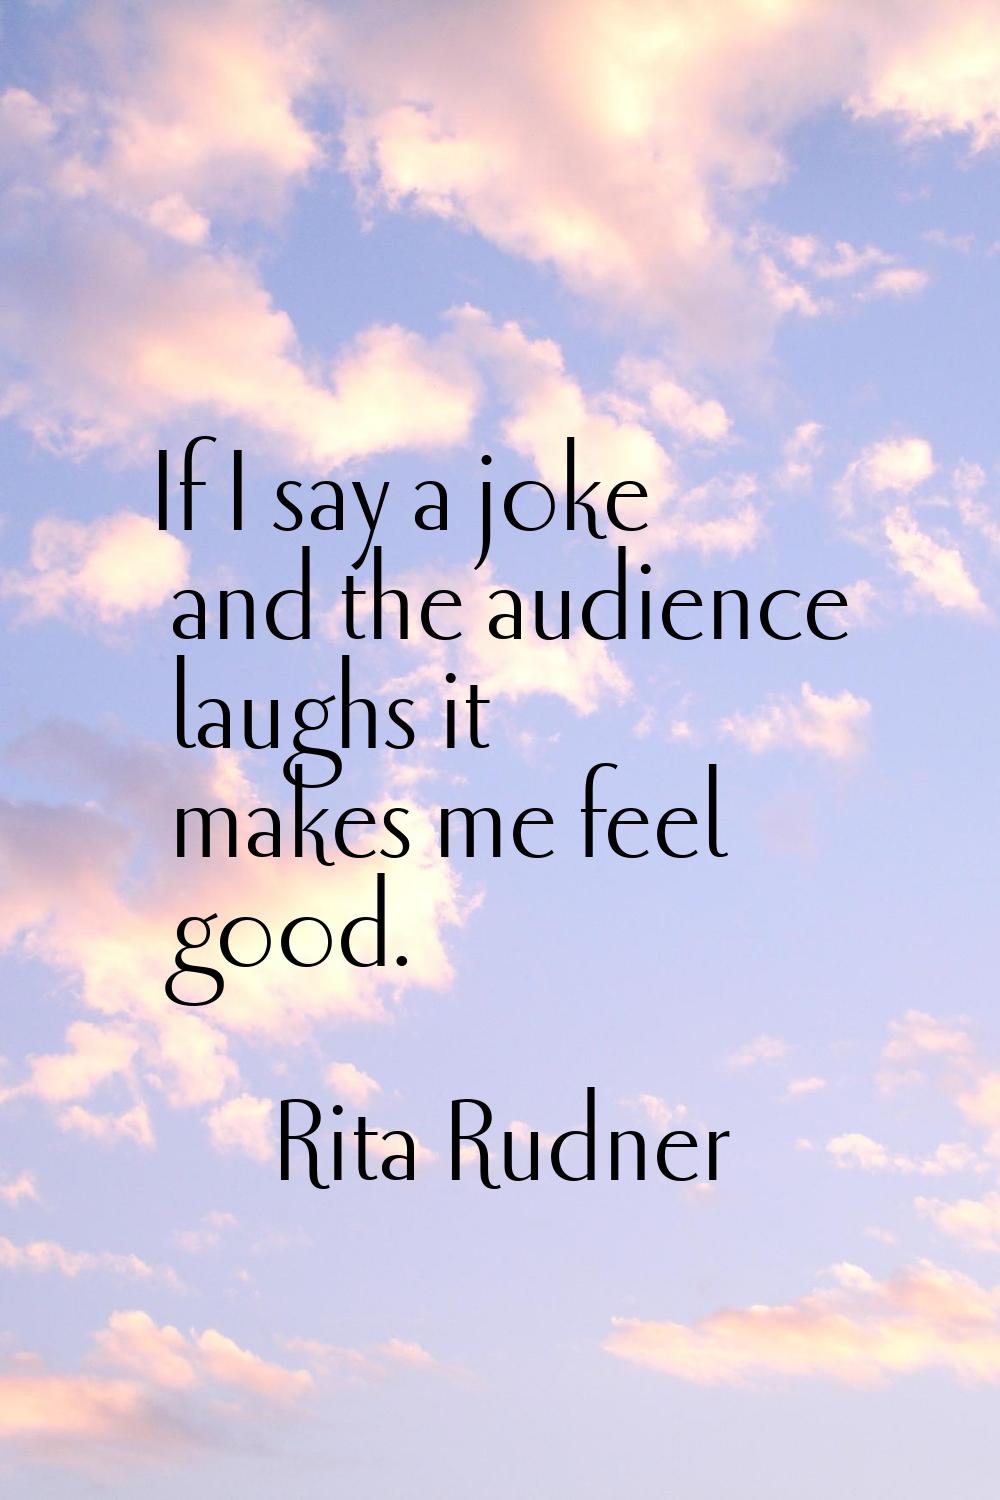 If I say a joke and the audience laughs it makes me feel good.